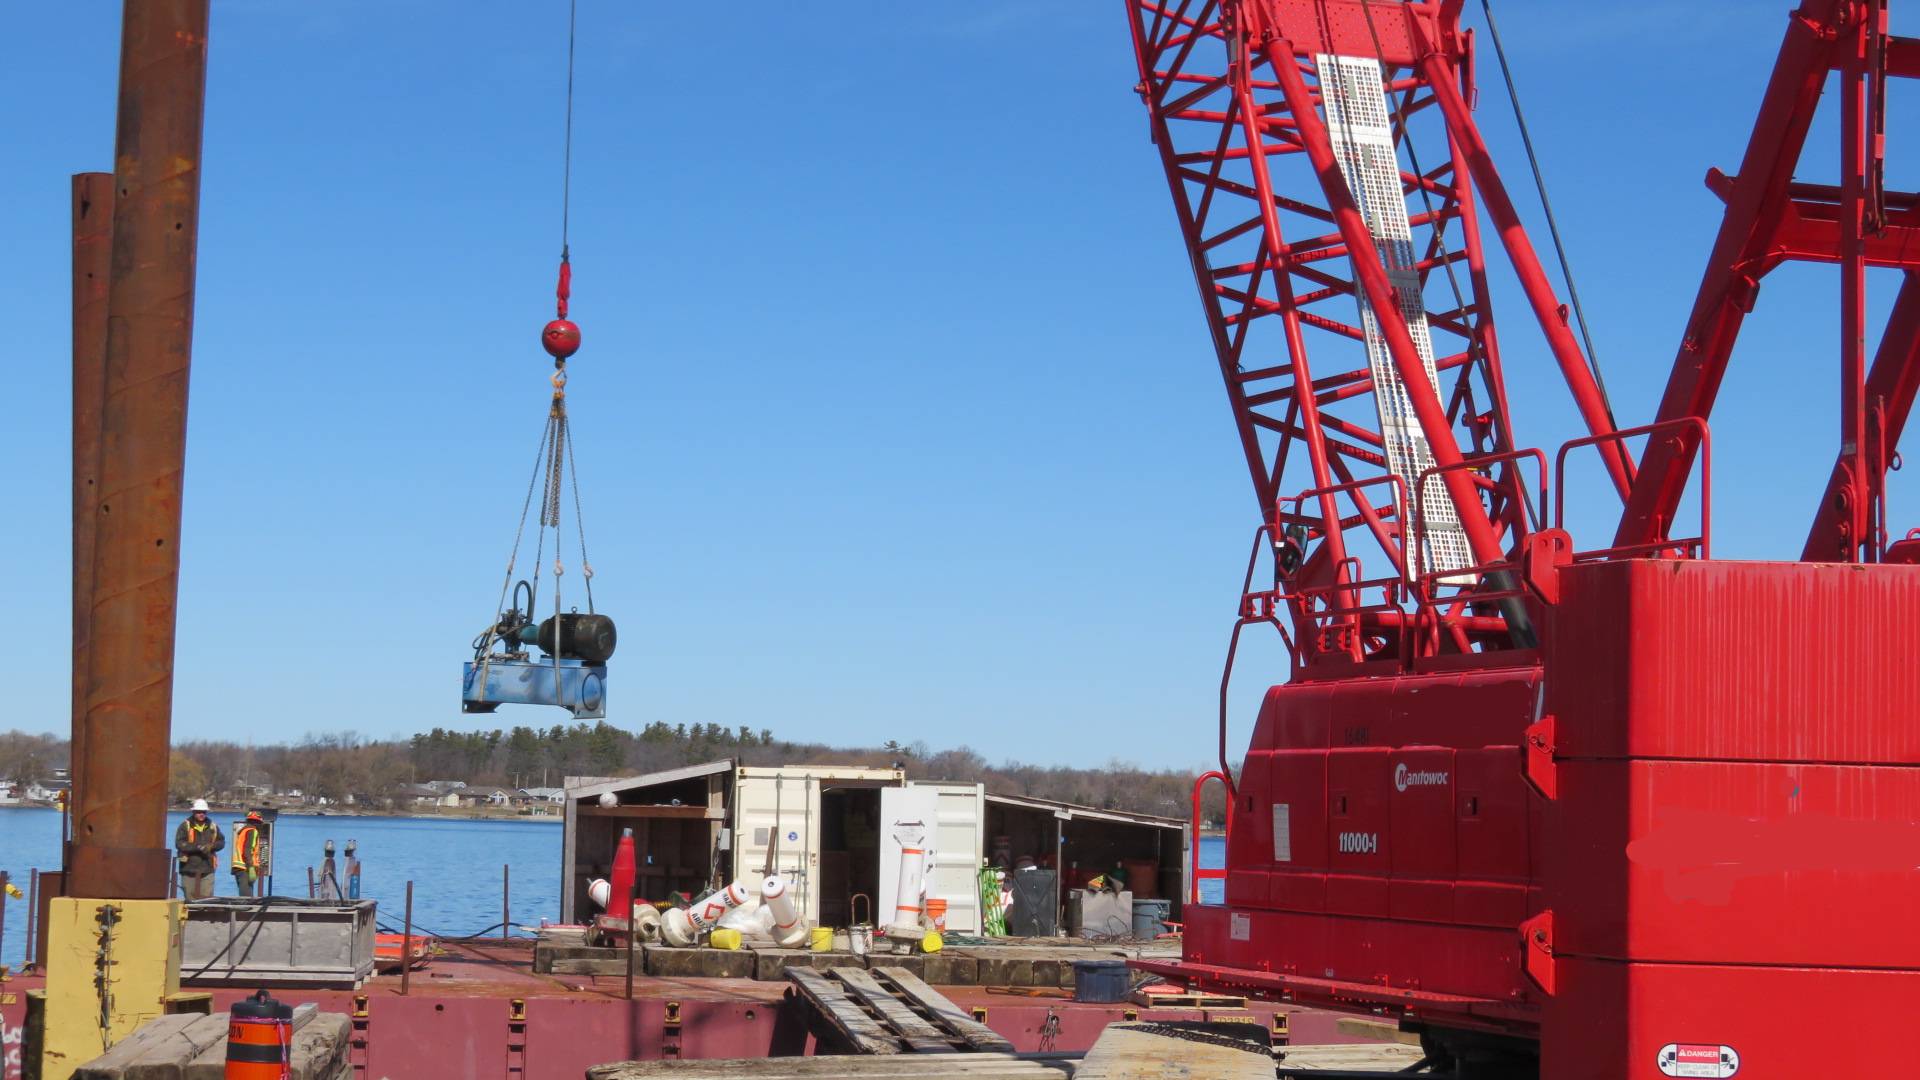 Lowering equipment onto the barge